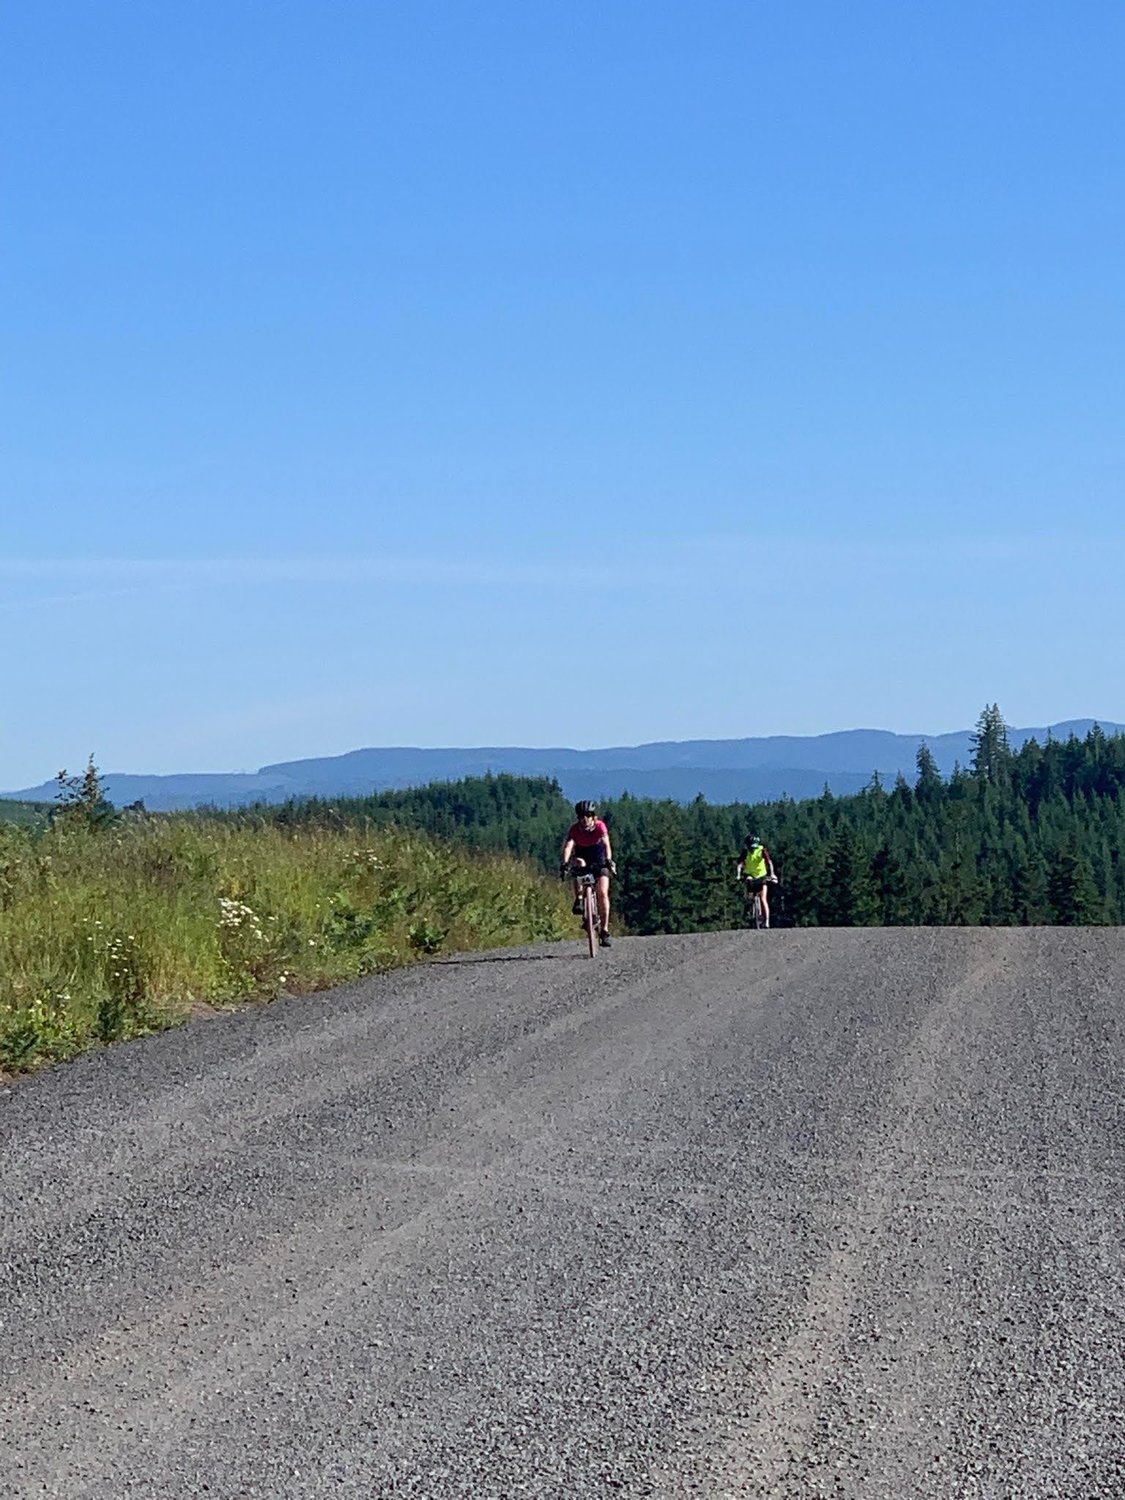 Cyclists finish their ascent up the gravel portion of Meskill Road on the way to Ceres Hill, as part of the Chris's Challenge course at Ride The Willapa 2022.